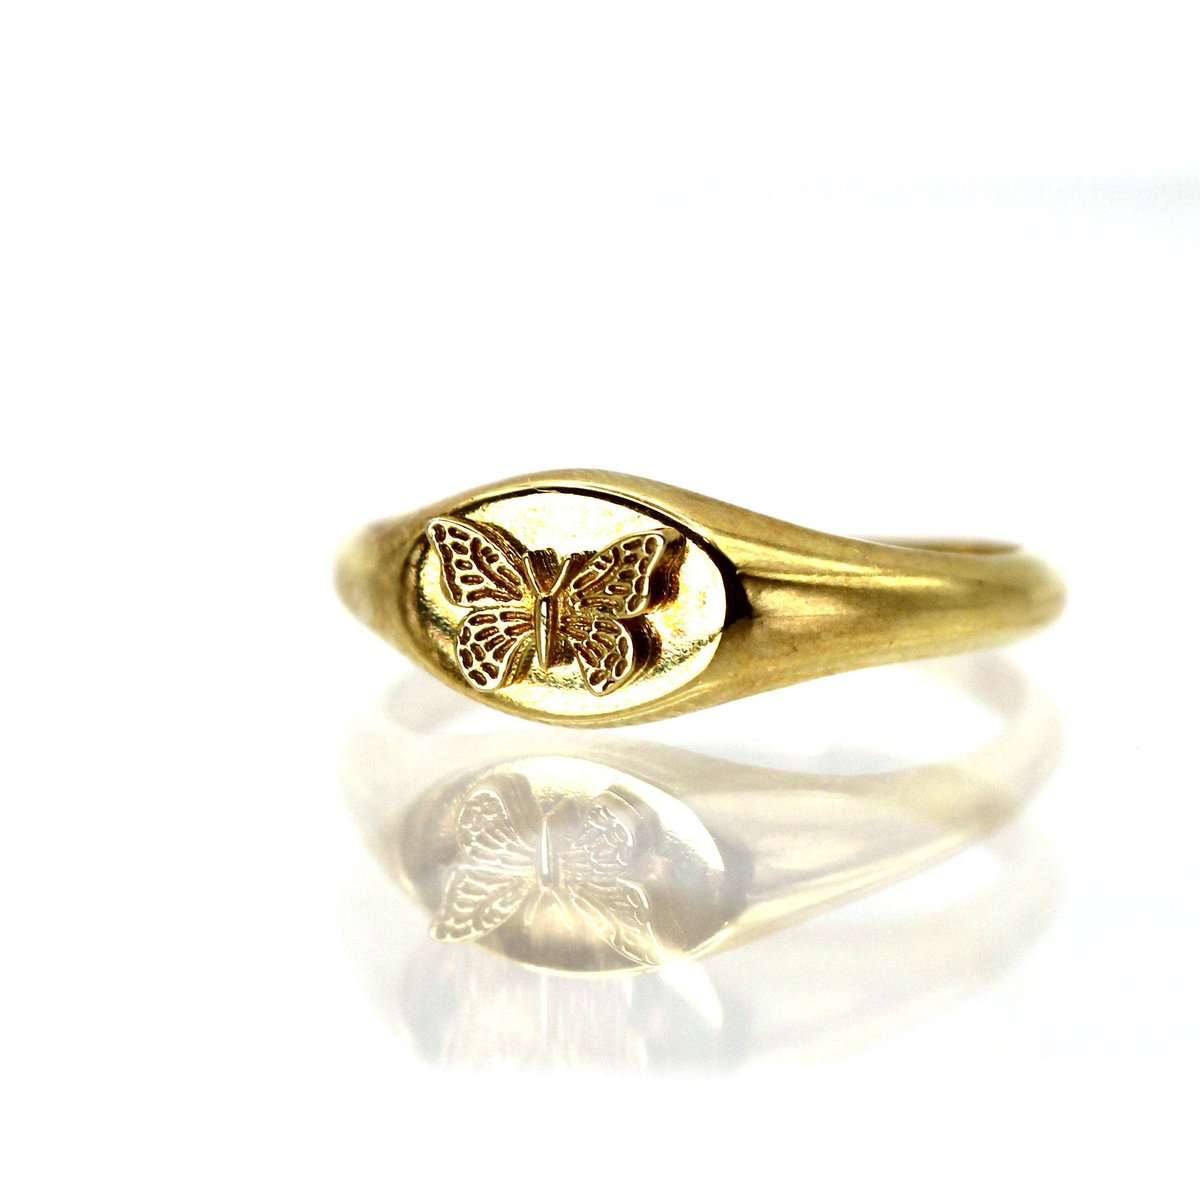 Excited to share the latest addition to my #etsy shop: Honey Butterfly Signet Ring, Butterfly Gold Ring, 14k Butterfly Ring / Gold Butterfly ring / Flying Butterfly Ring / Gold Ring etsy.me/3Vqc4Mw #gold #14kgoldring #butterflyring #14kbutterflyring #flyingring